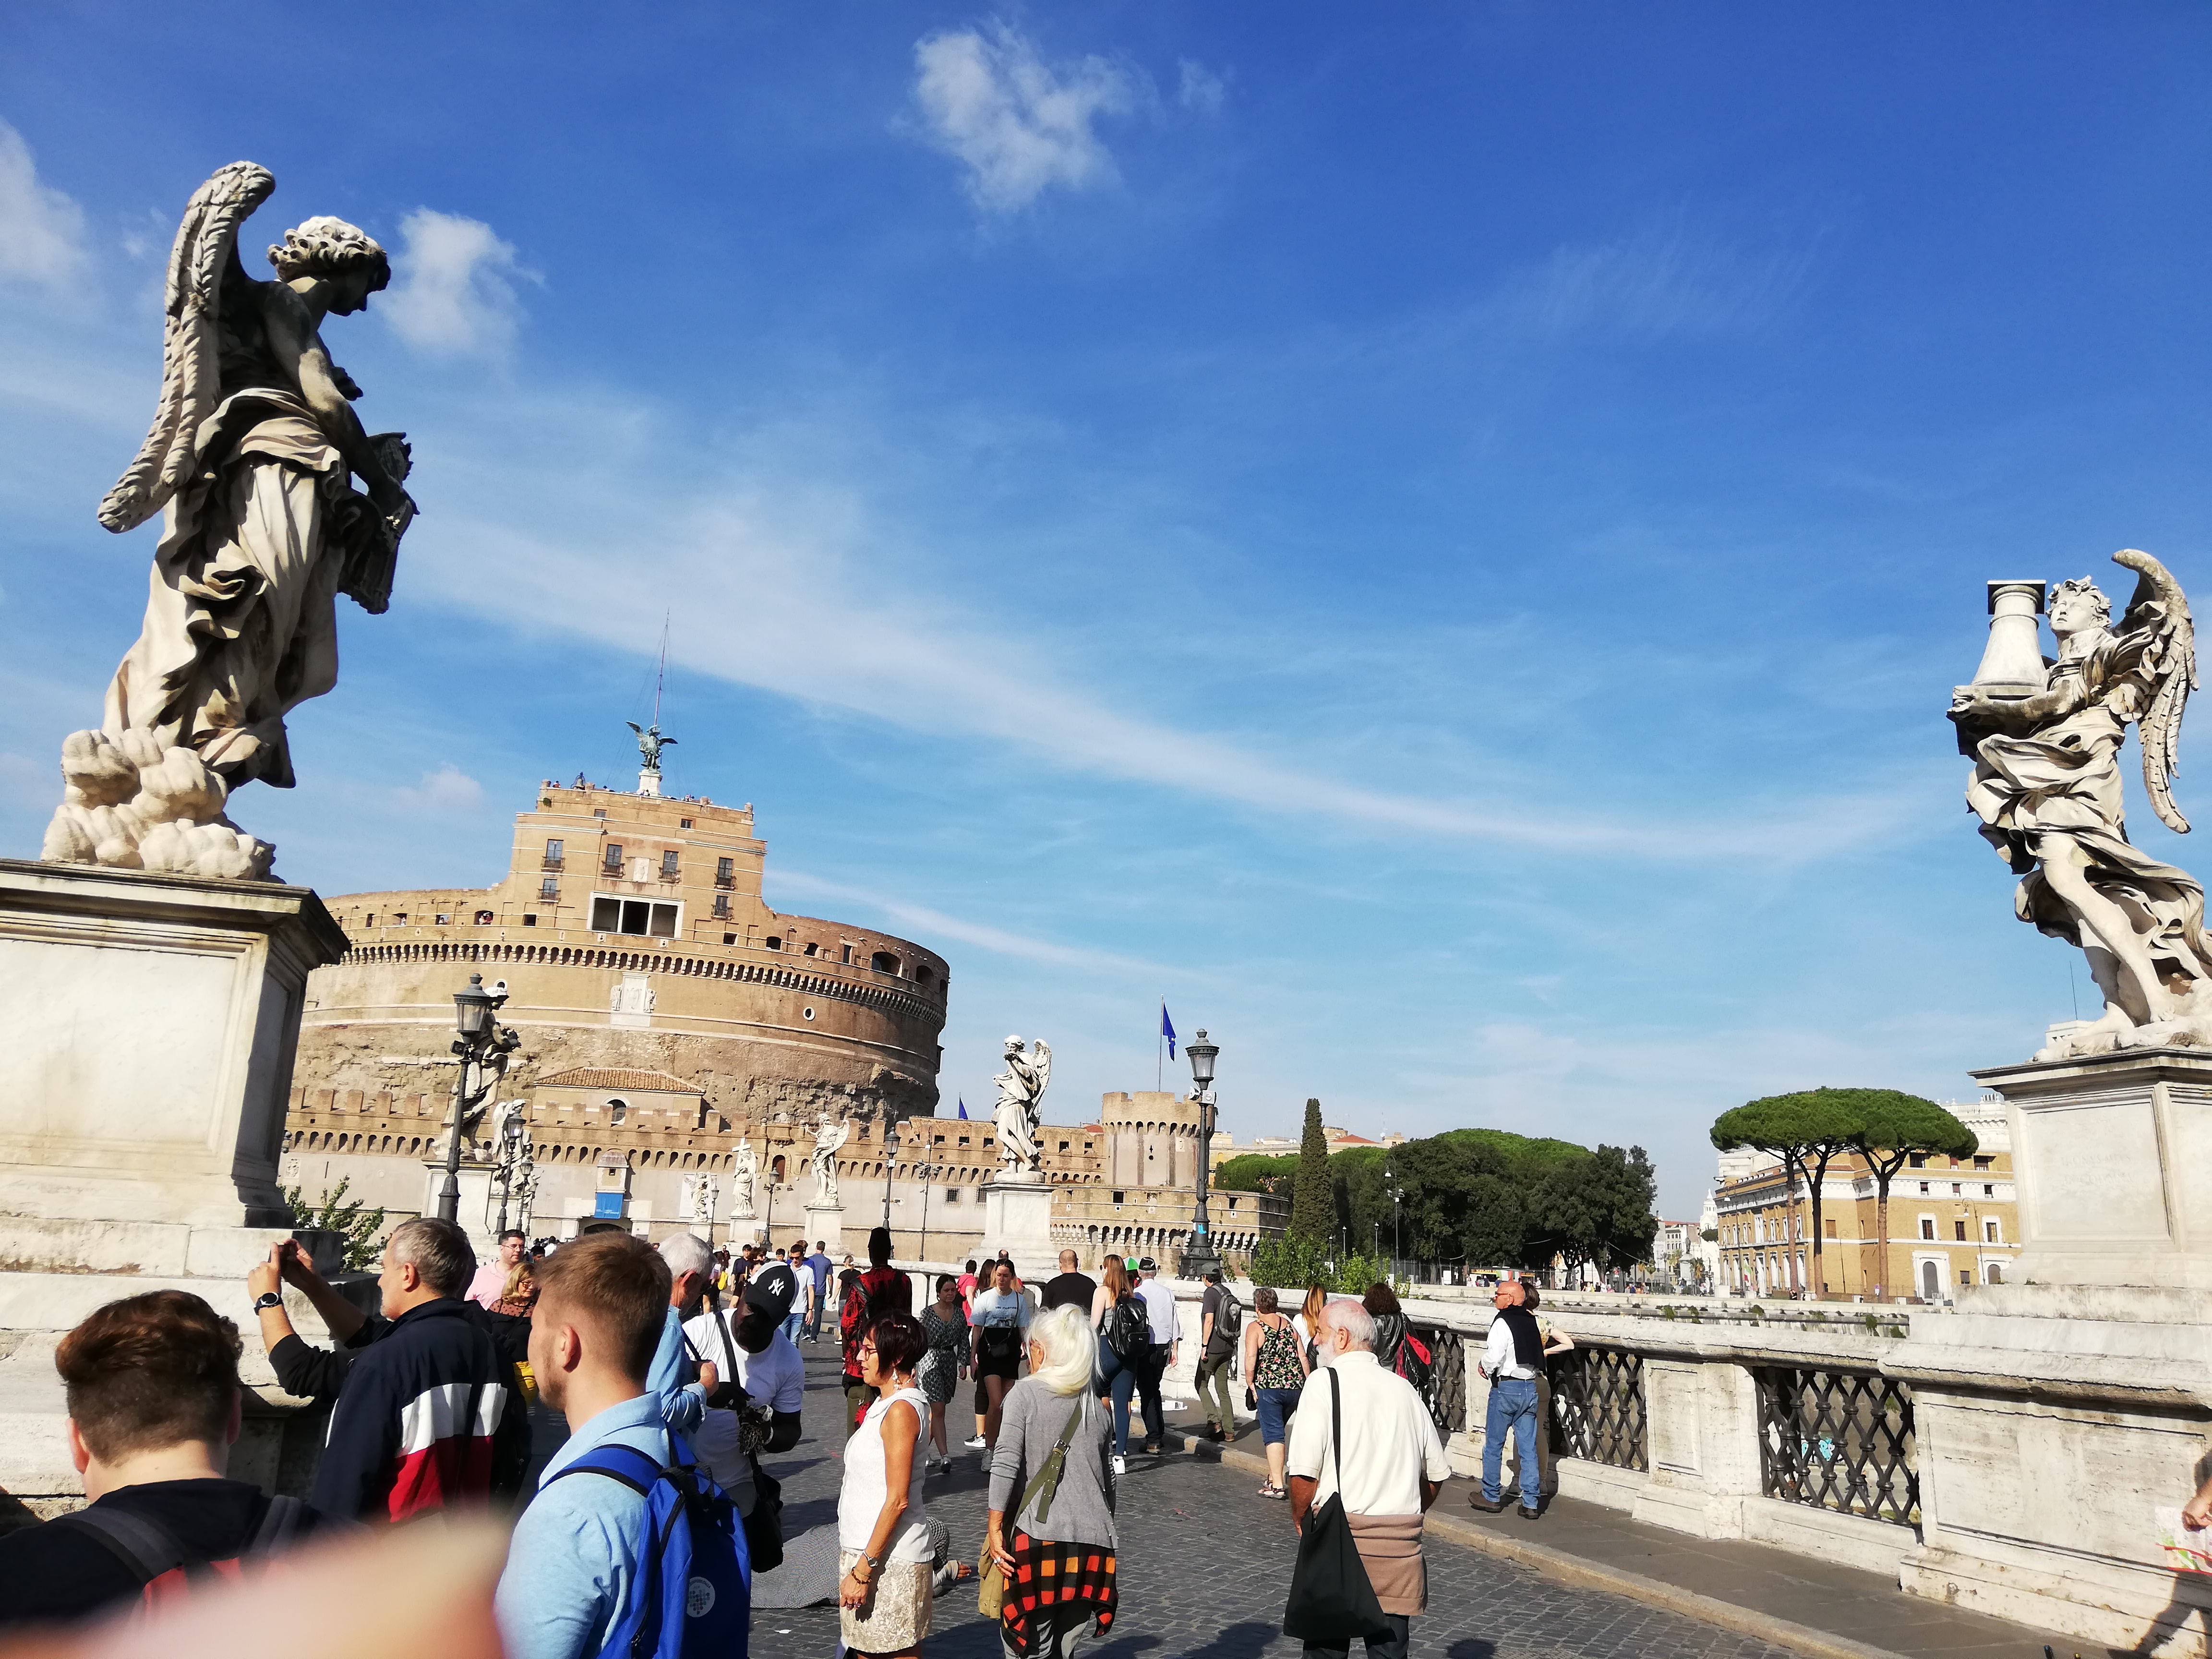 Easy guide to what to do in Rome, booking your accomodation, attractions tickets, things to see and do in Rome Italy